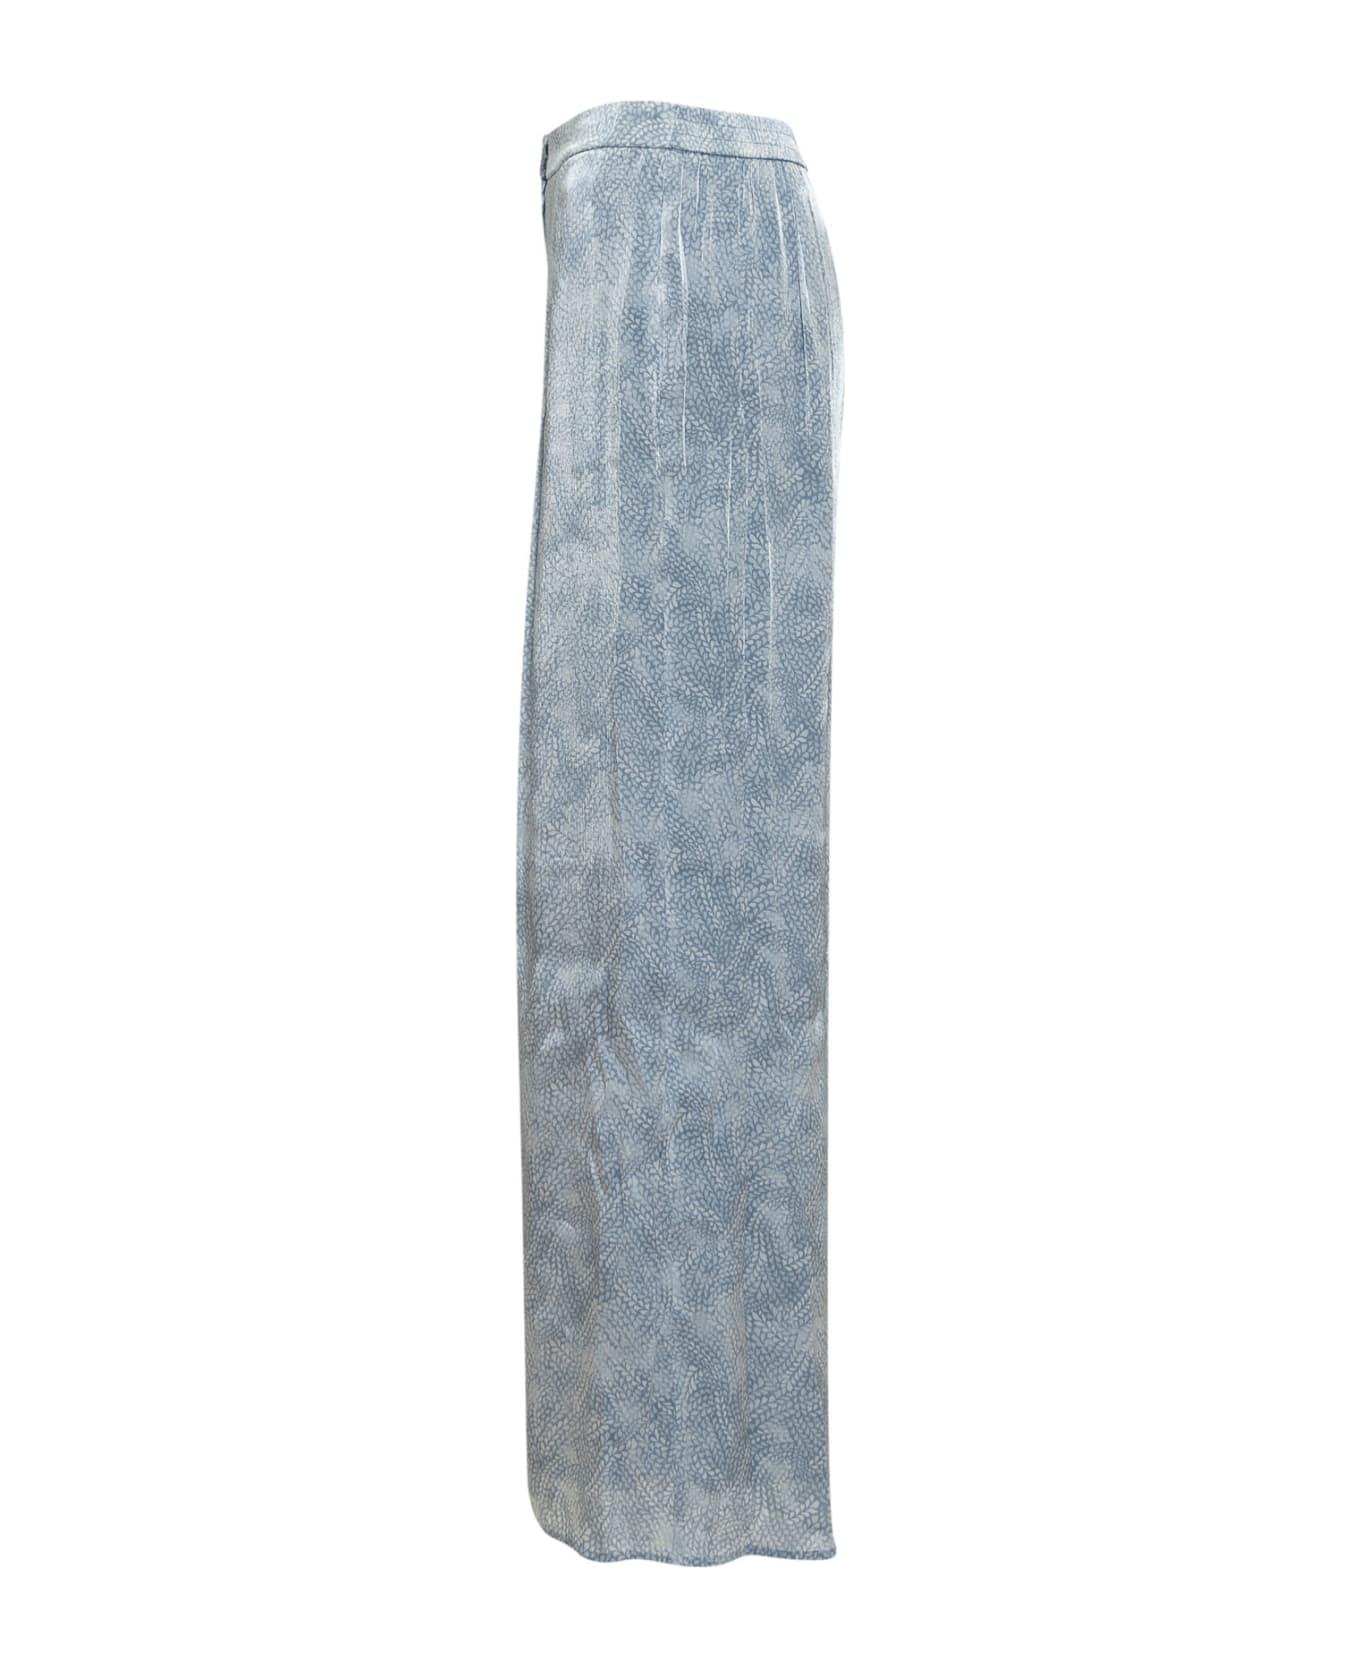 Michael Kors Trousers With Petals Decoration - CHAMBRAY